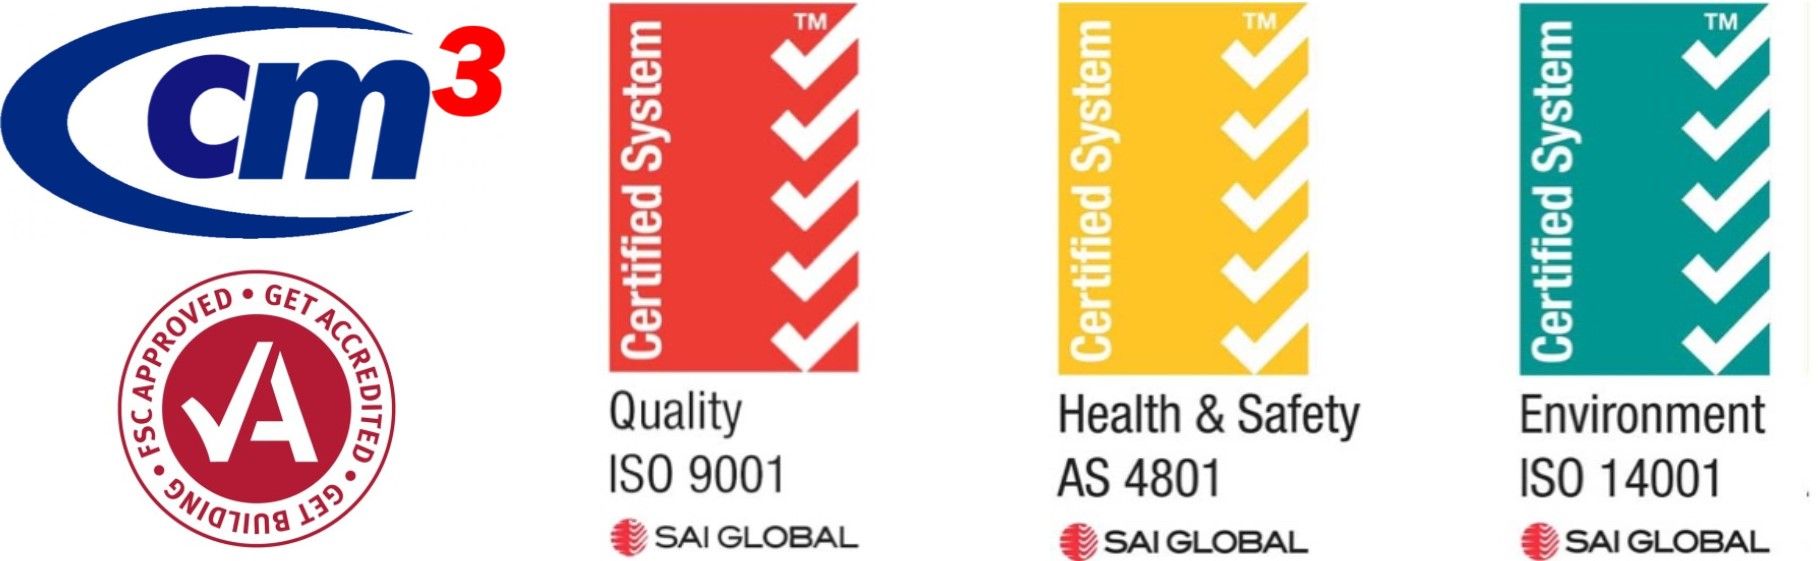 Quality, Health & Safety, Environment licenses